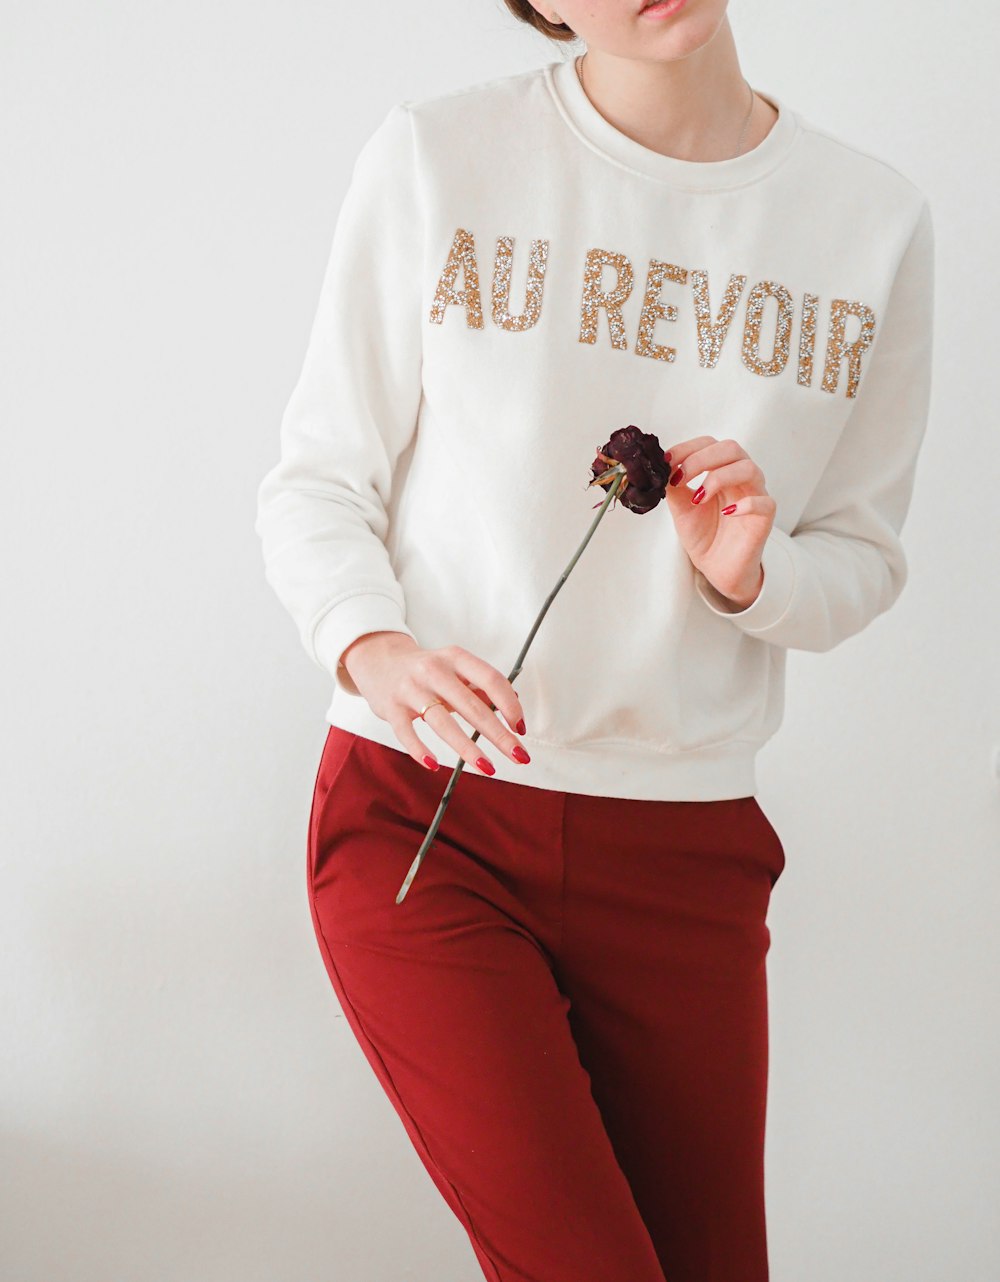 woman in white long sleeve shirt and red pants holding silver spoon